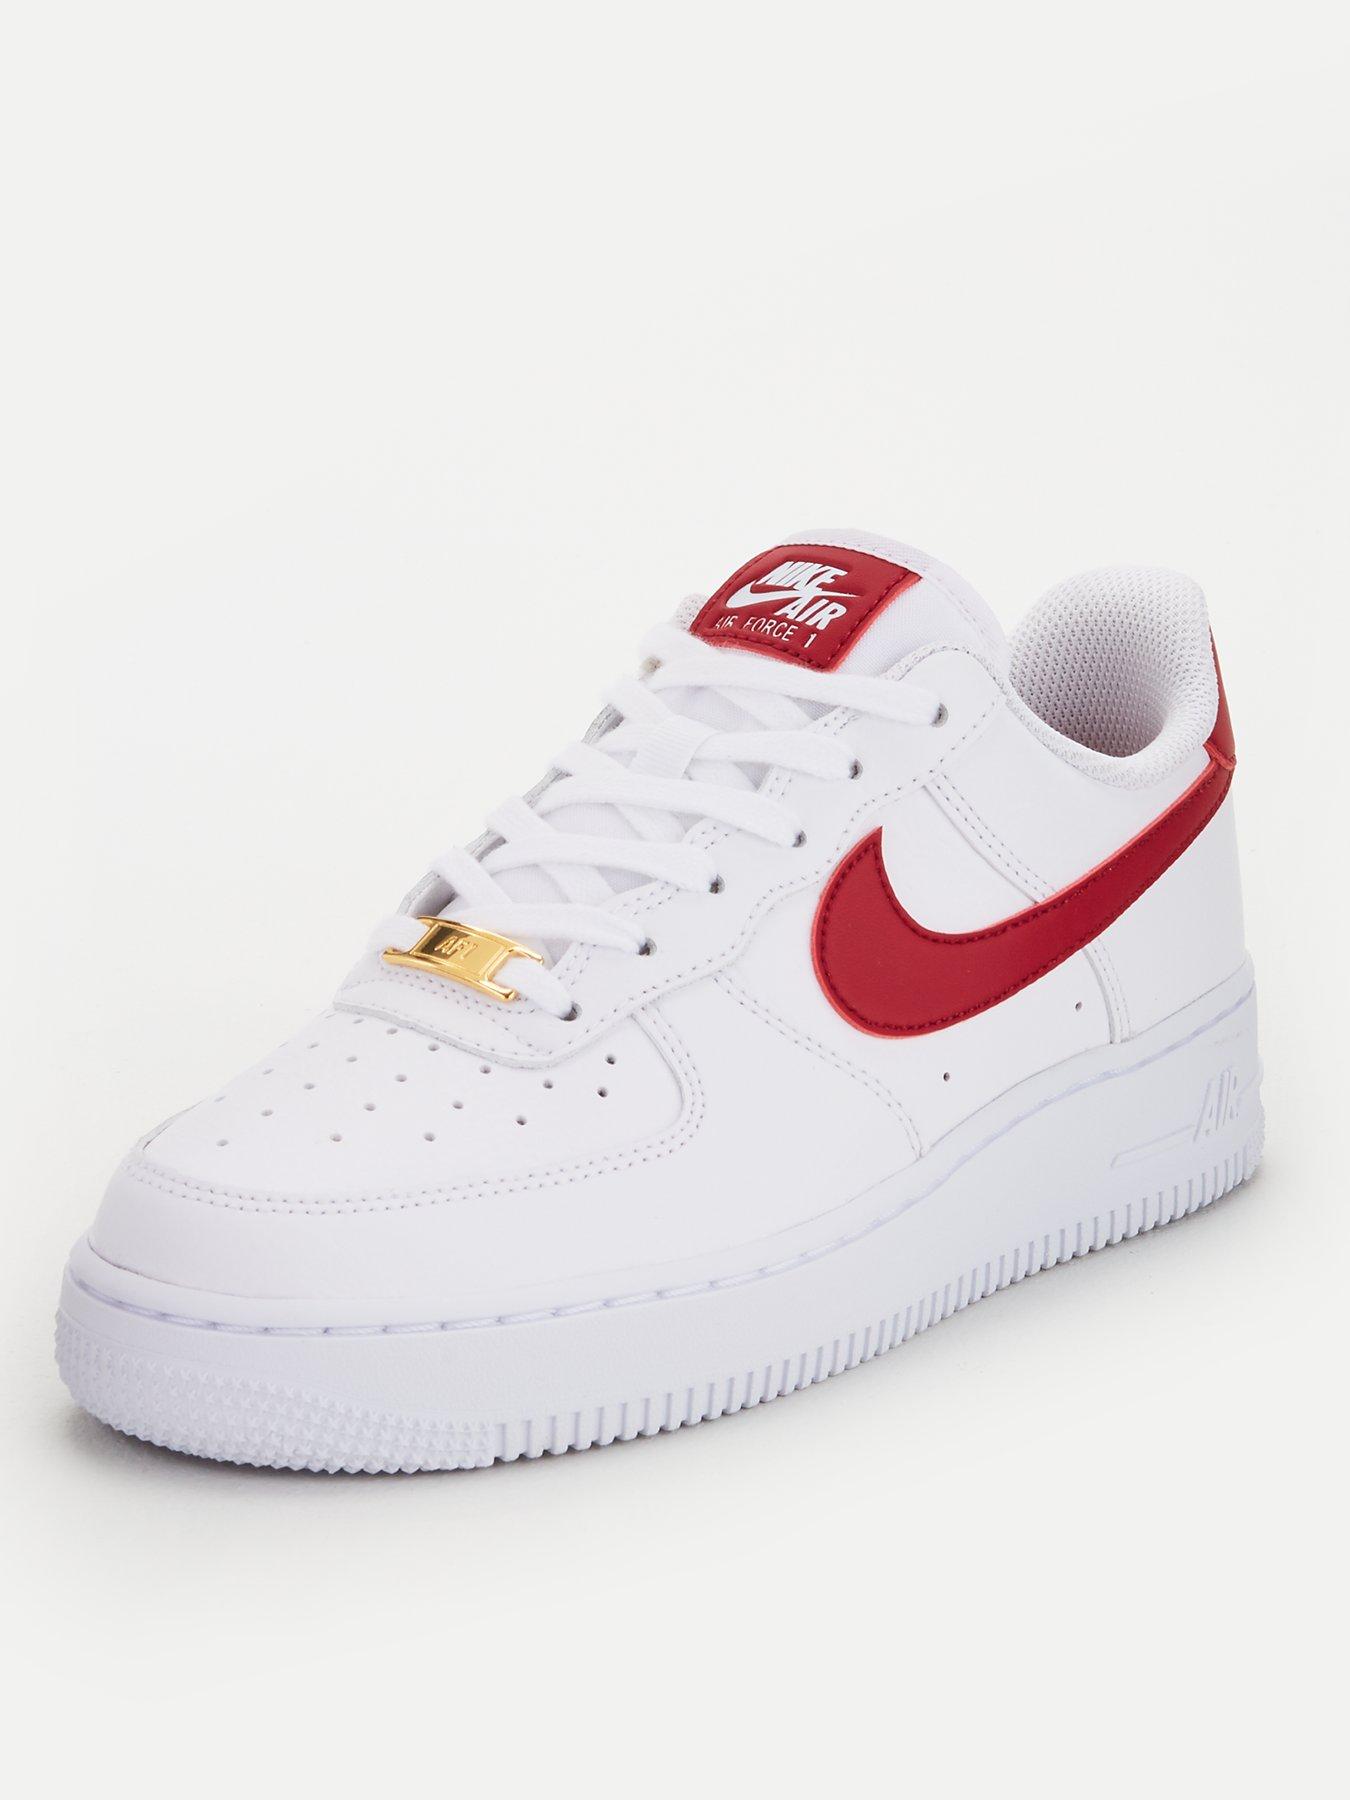 air force 1 size 3